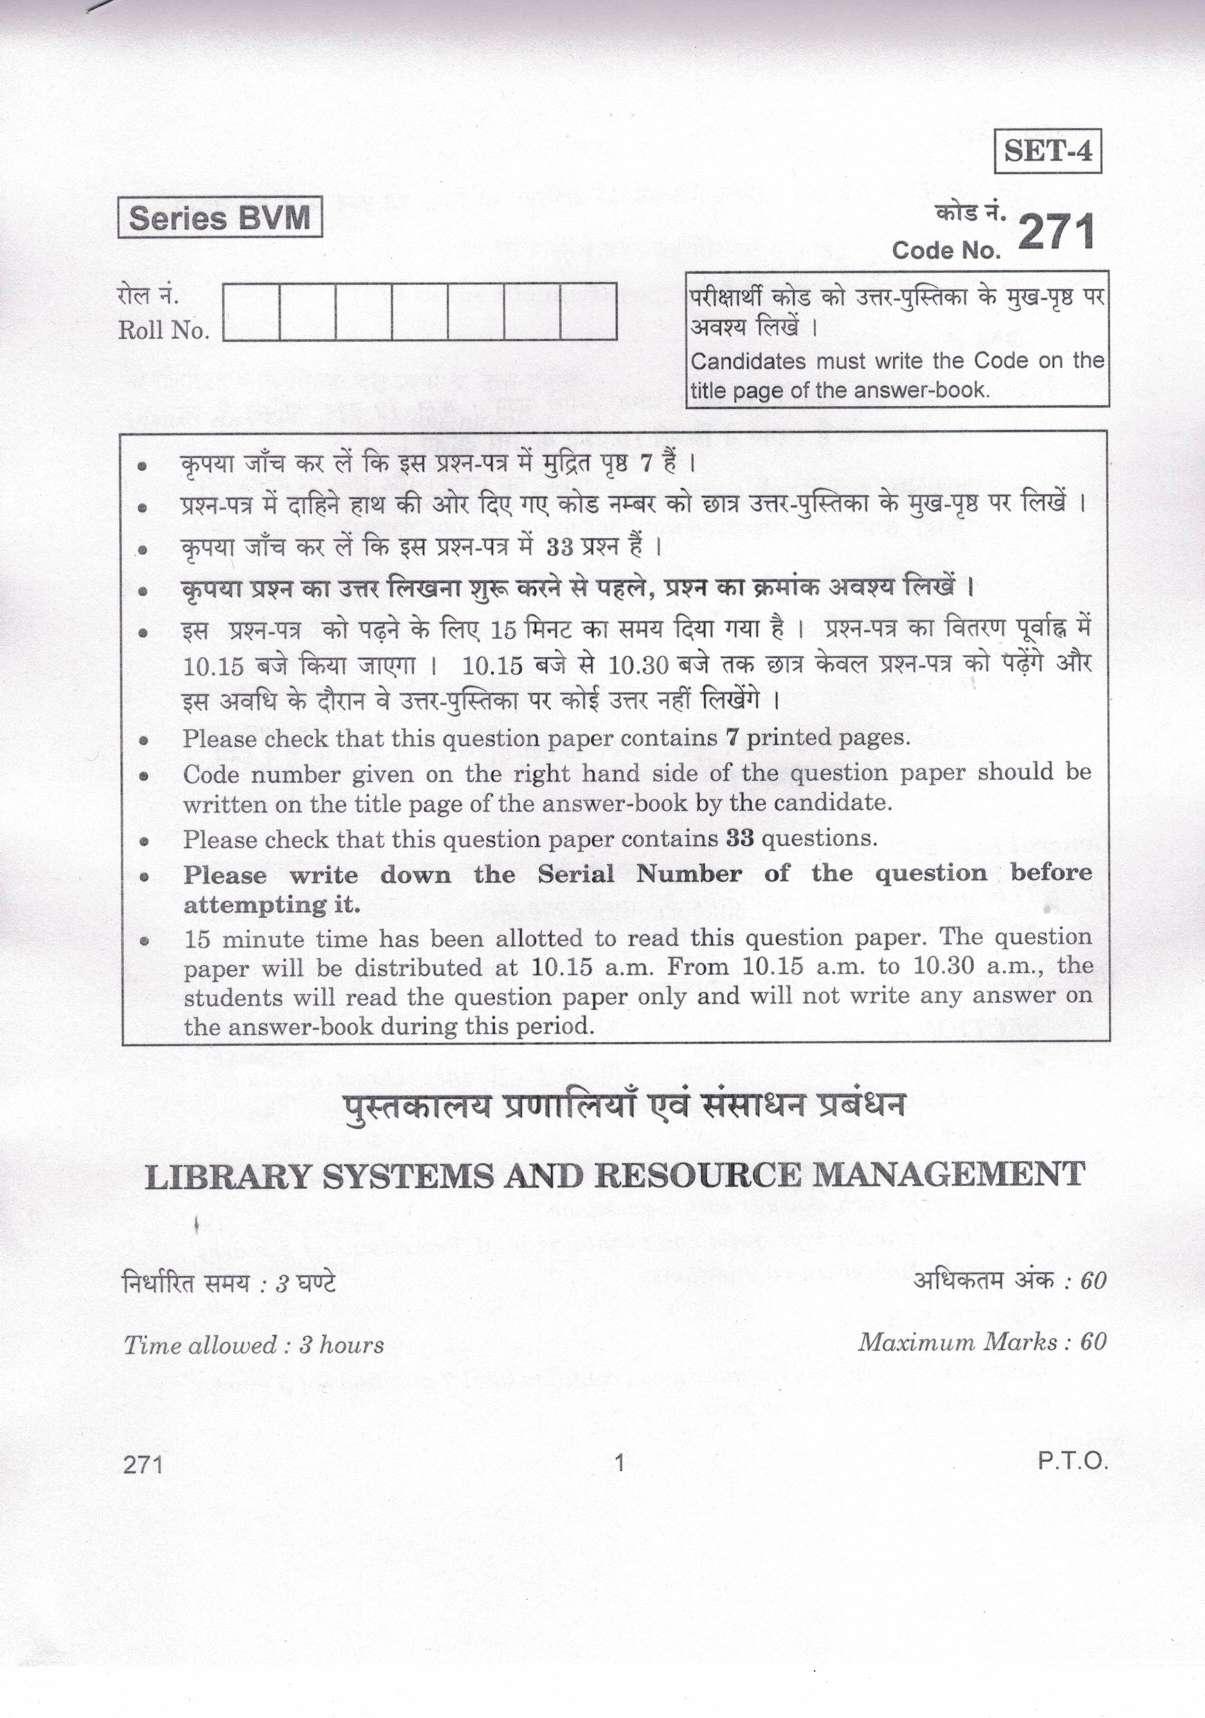 CBSE Class 12 271 Libray Systems And Resource Management_compressed 2019 Question Paper - Page 1